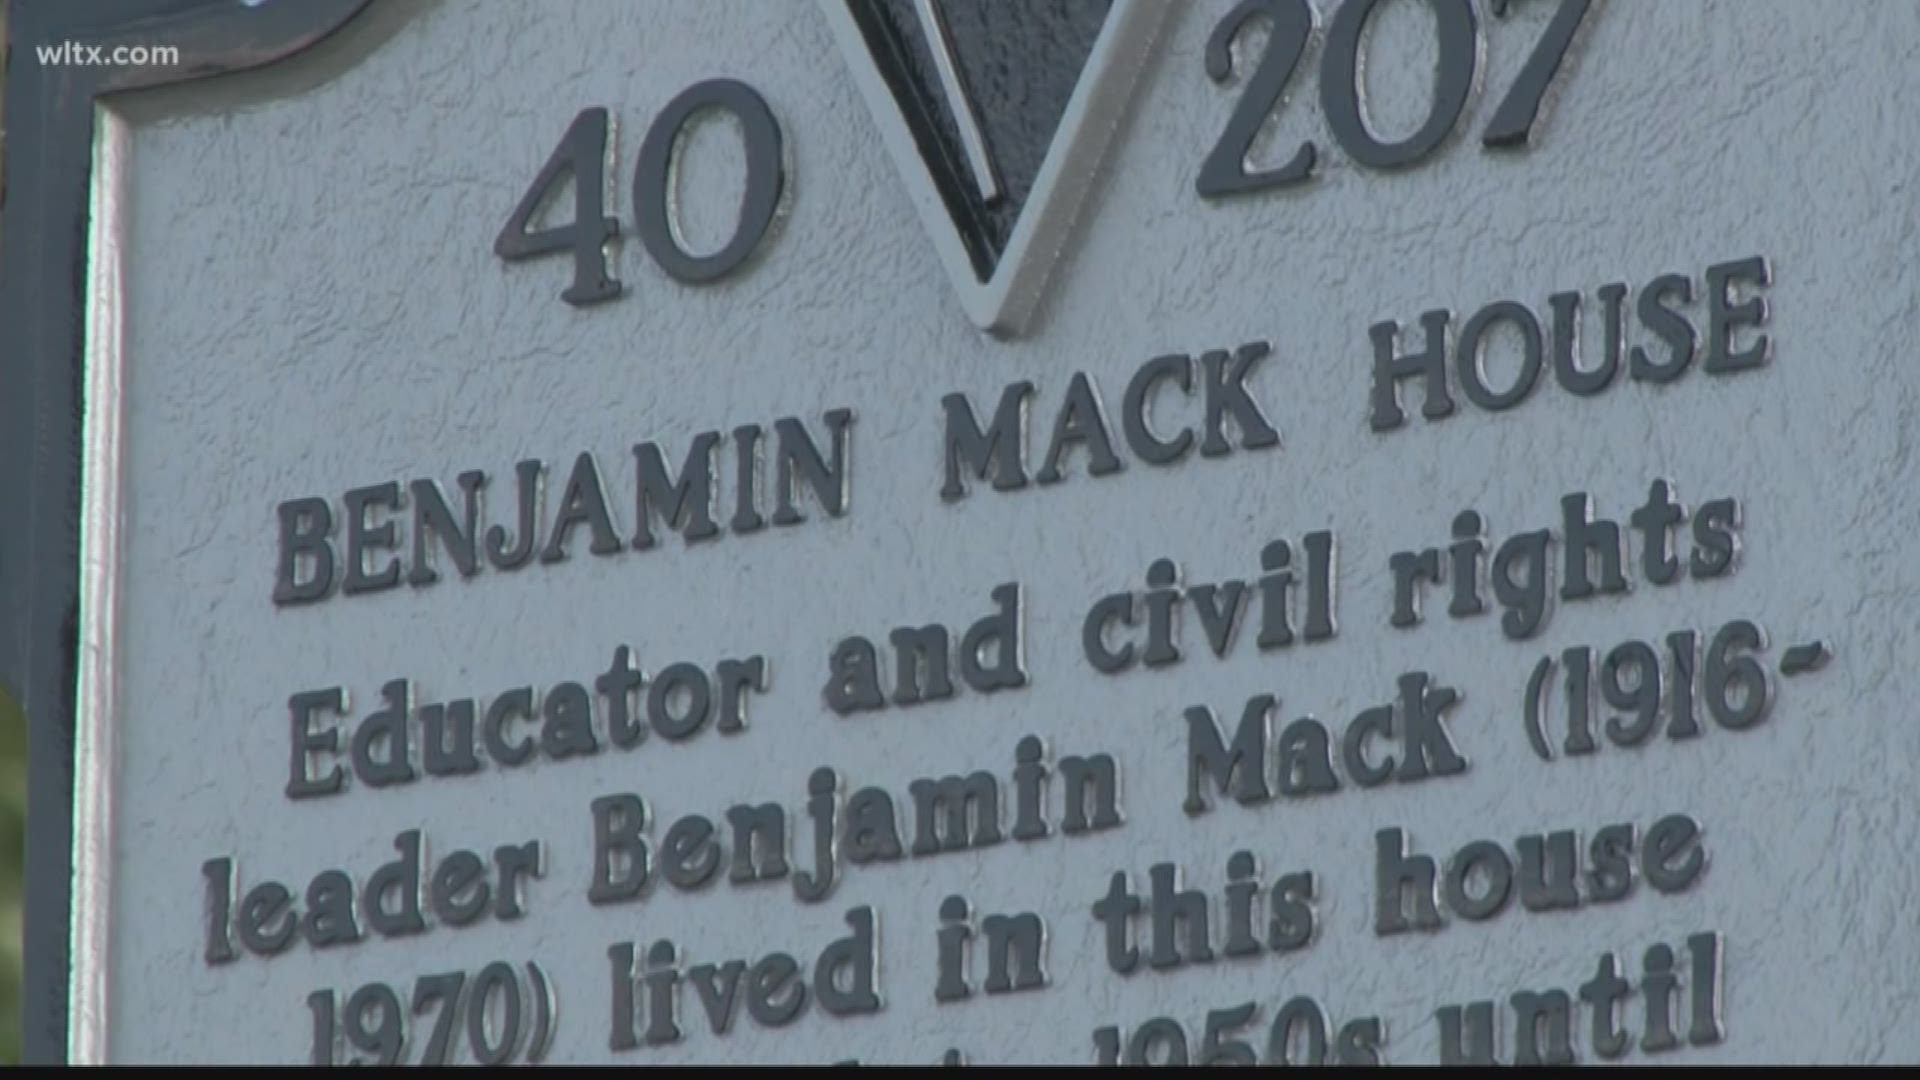 A local civil rights leader was honored with a commemorative plaque Sunday. 